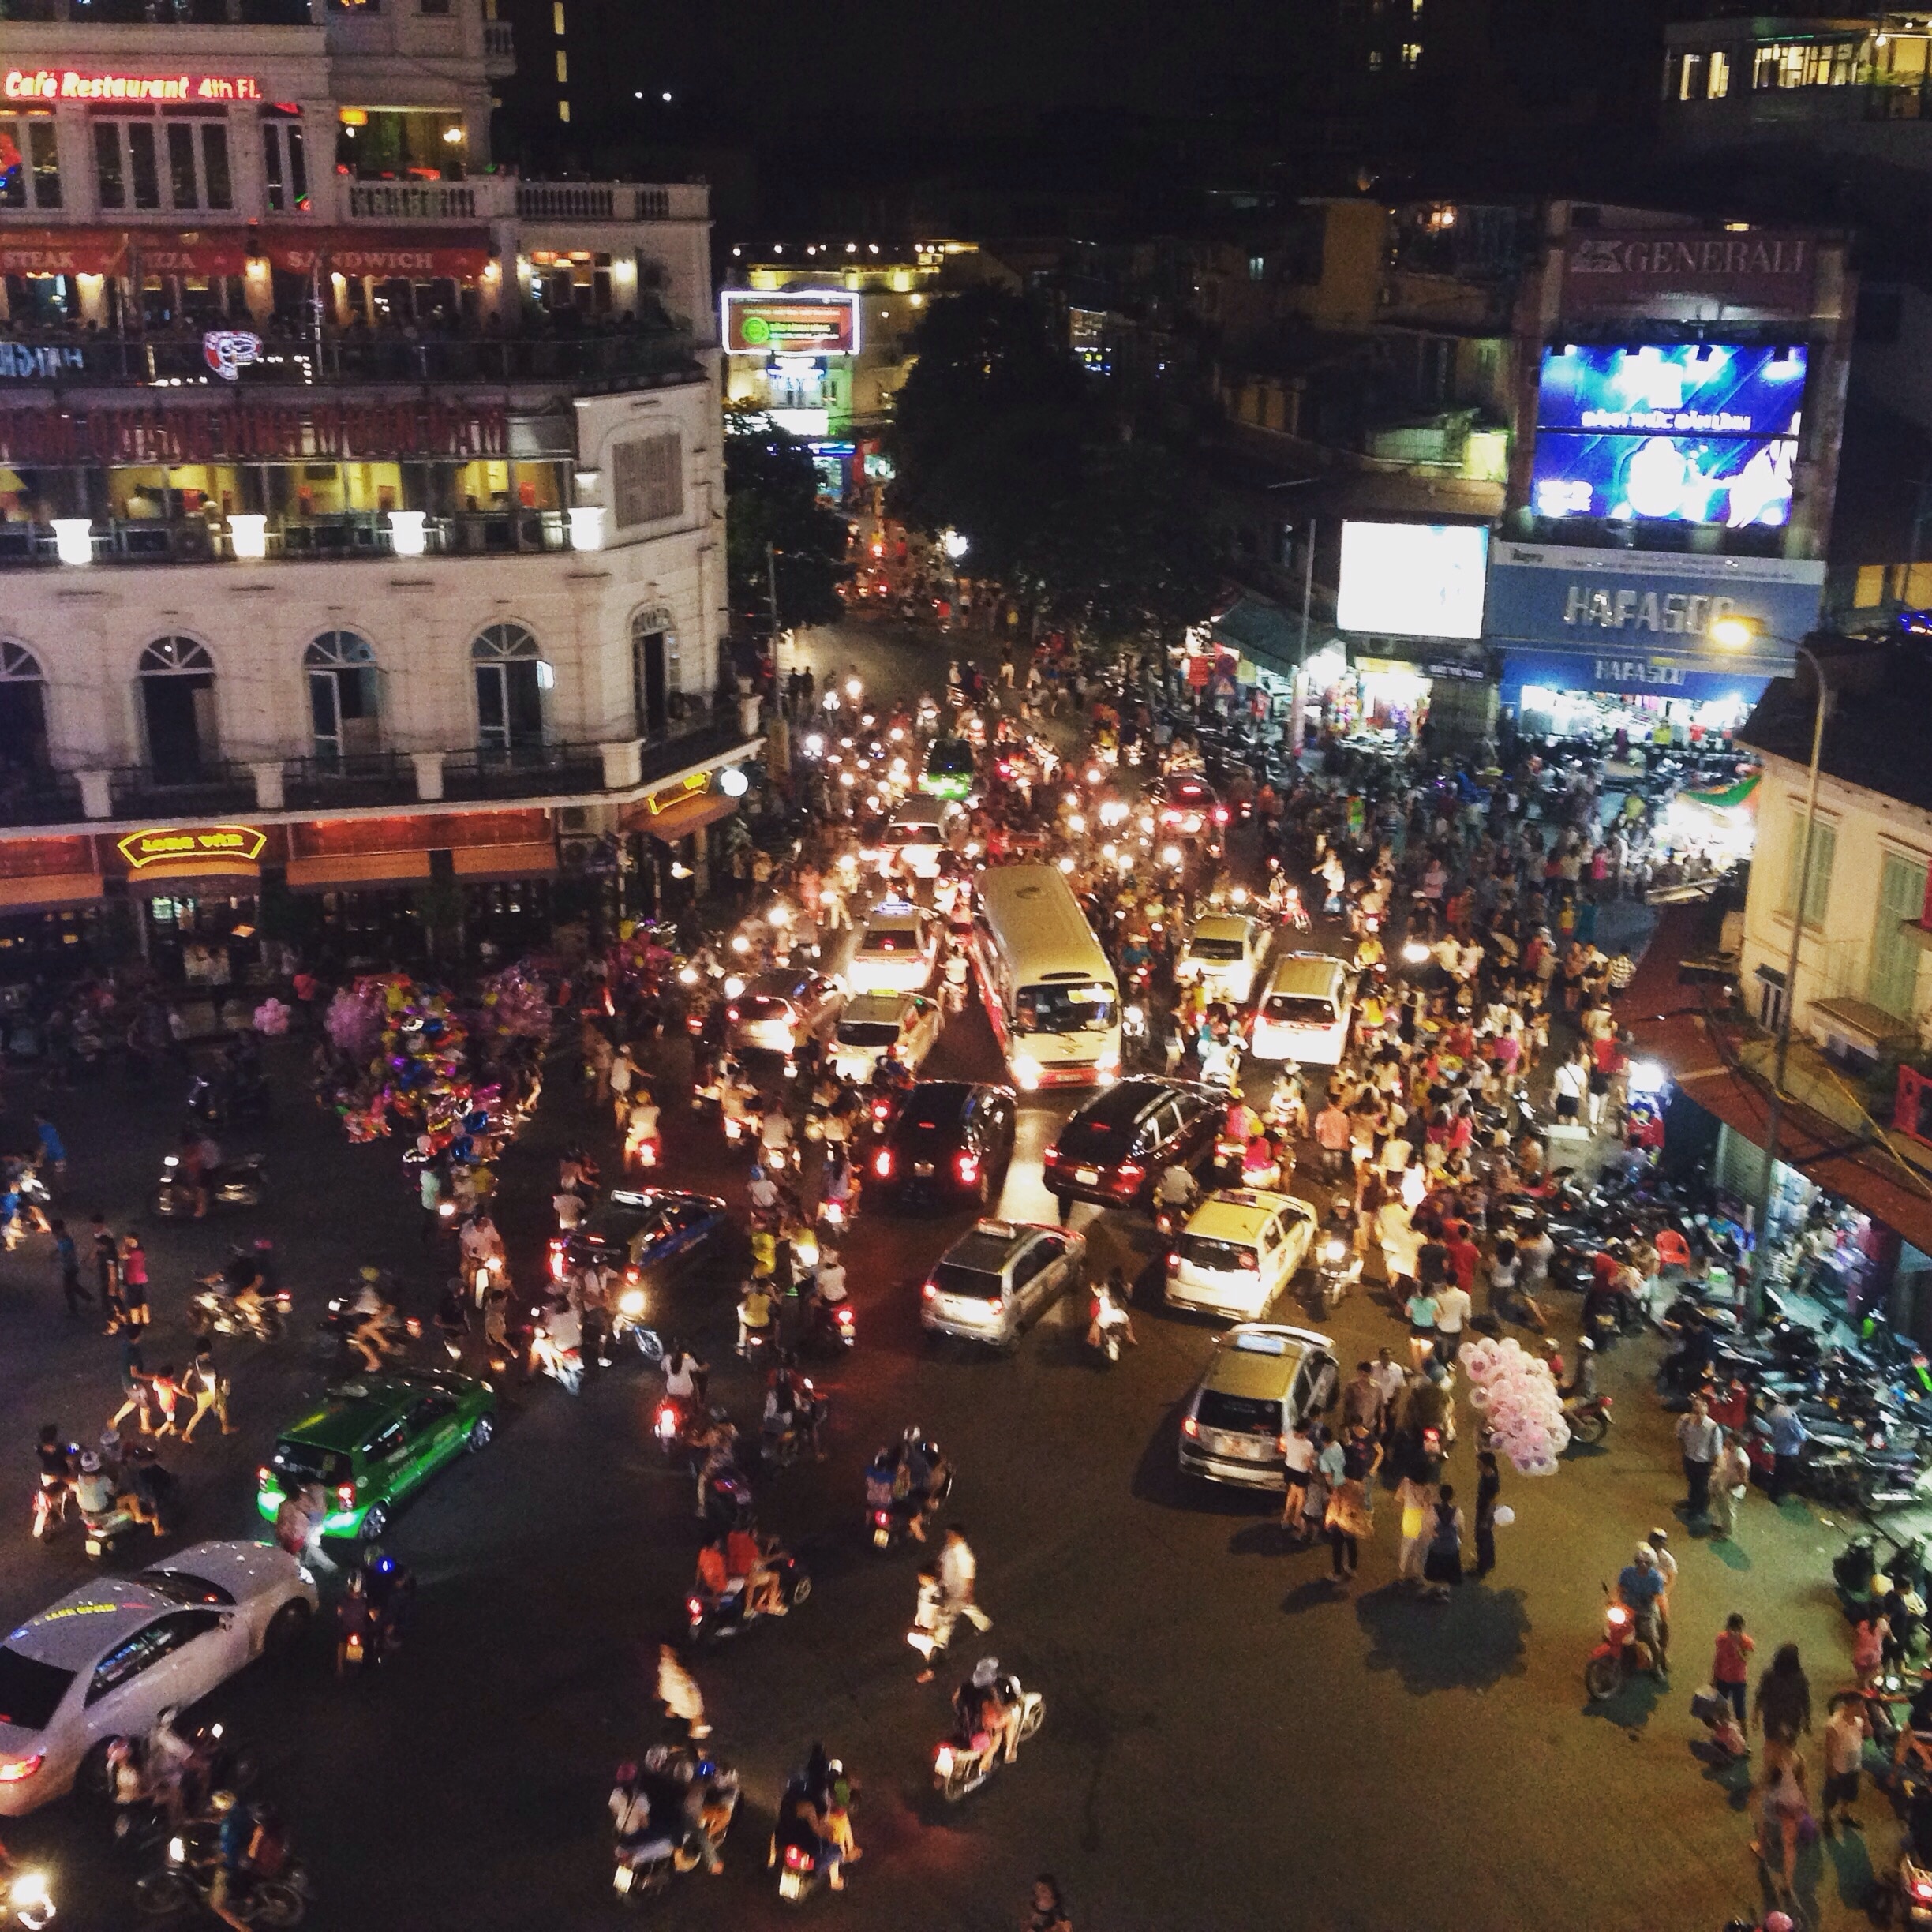 The narrow streets and swarms of motorbikes in Hanoi's Old Quarter can be both charming and overwhelming. The City View Cafe located near the NW corner of Hoan Kiem lake offers spectacular views of the chaos below. #hanoi #traffic #hoankiemlake #oldquarter #vietnam